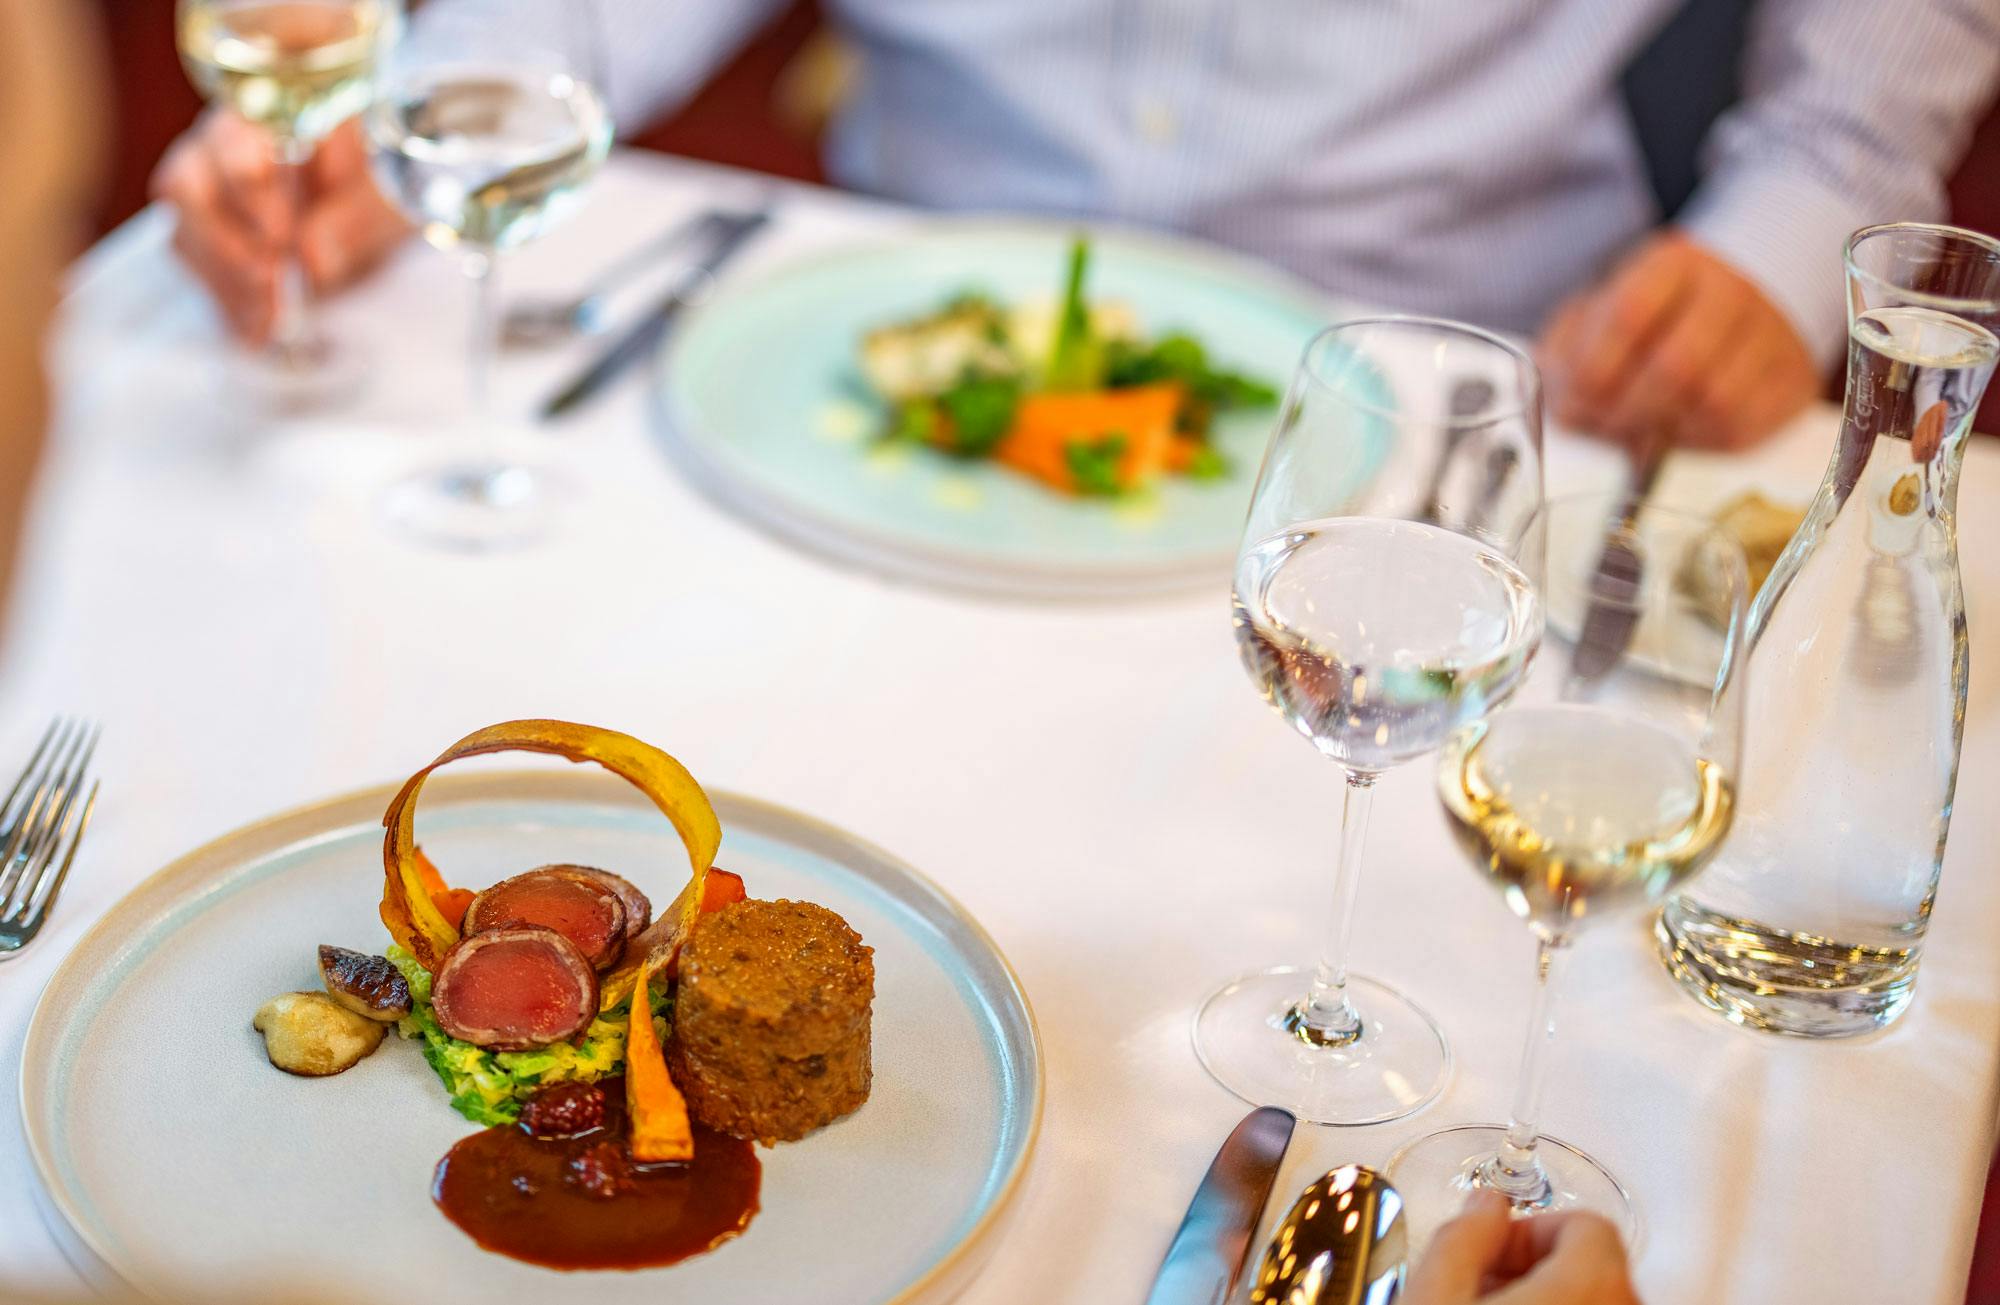 Gourmet meal in a restaurant with wine glasses and blurred background.